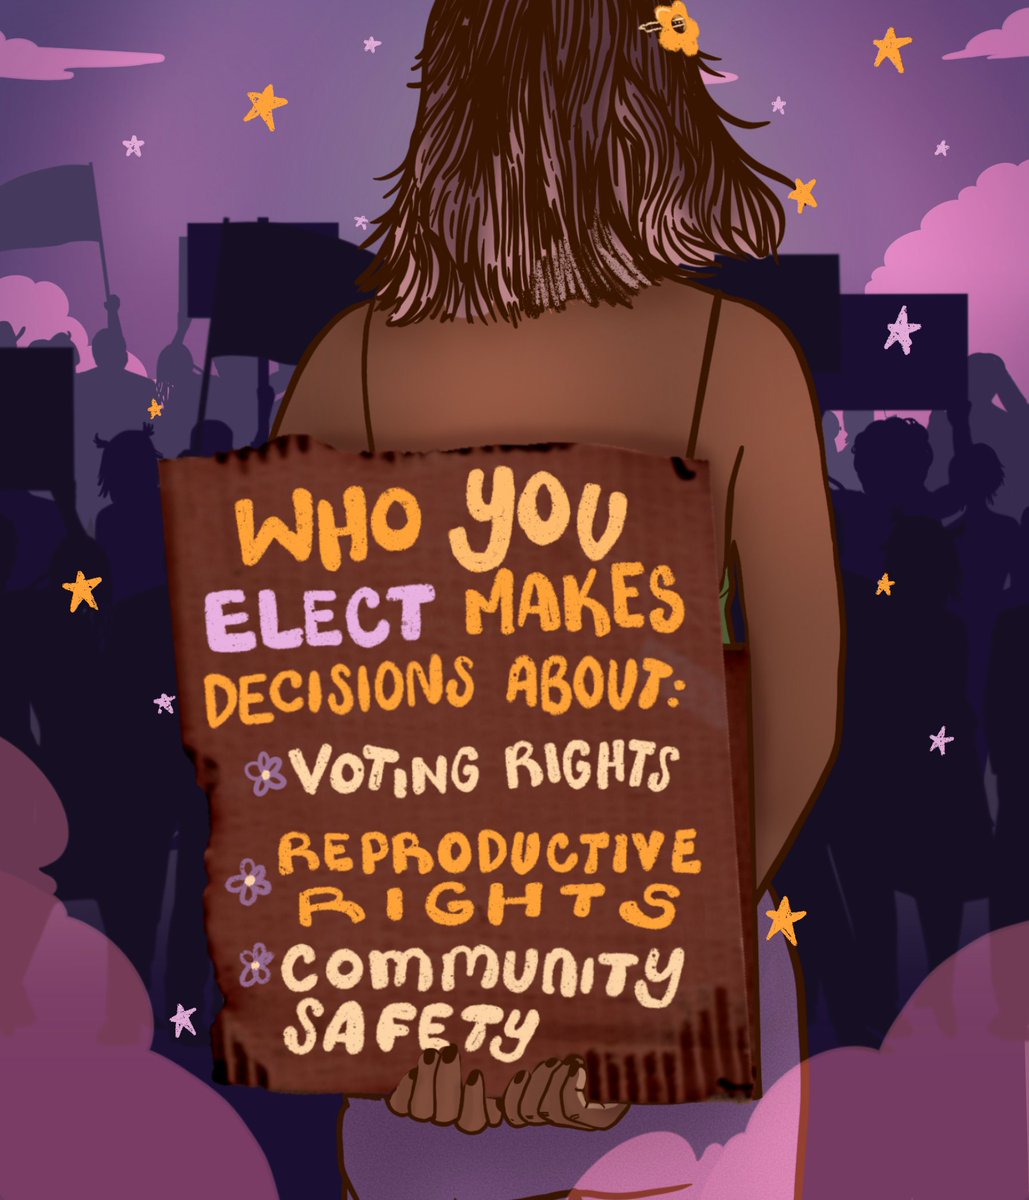 Election Day is today, and it's the last day to vote. Your rights are on the ballot. vote.org/showupshowout #PsGoVote